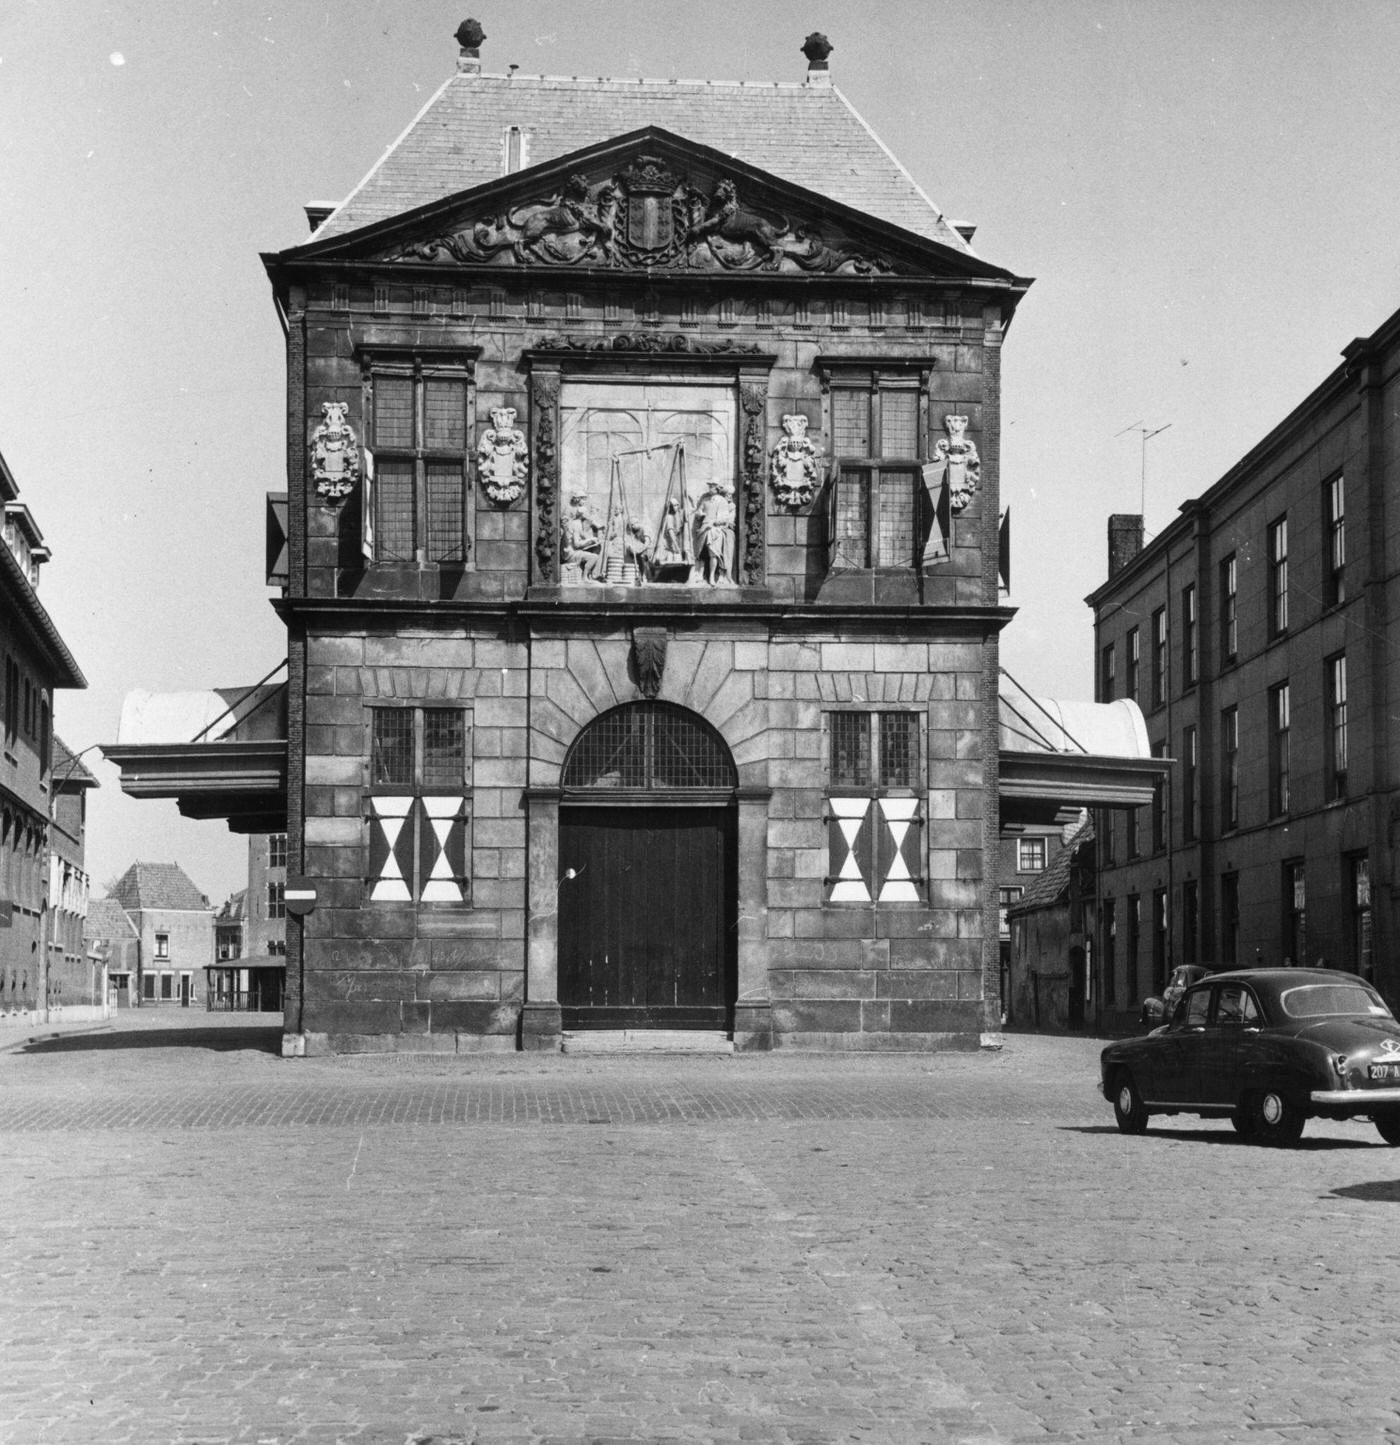 A weighing house for cheese in the Dutch town of Gouda, 1952